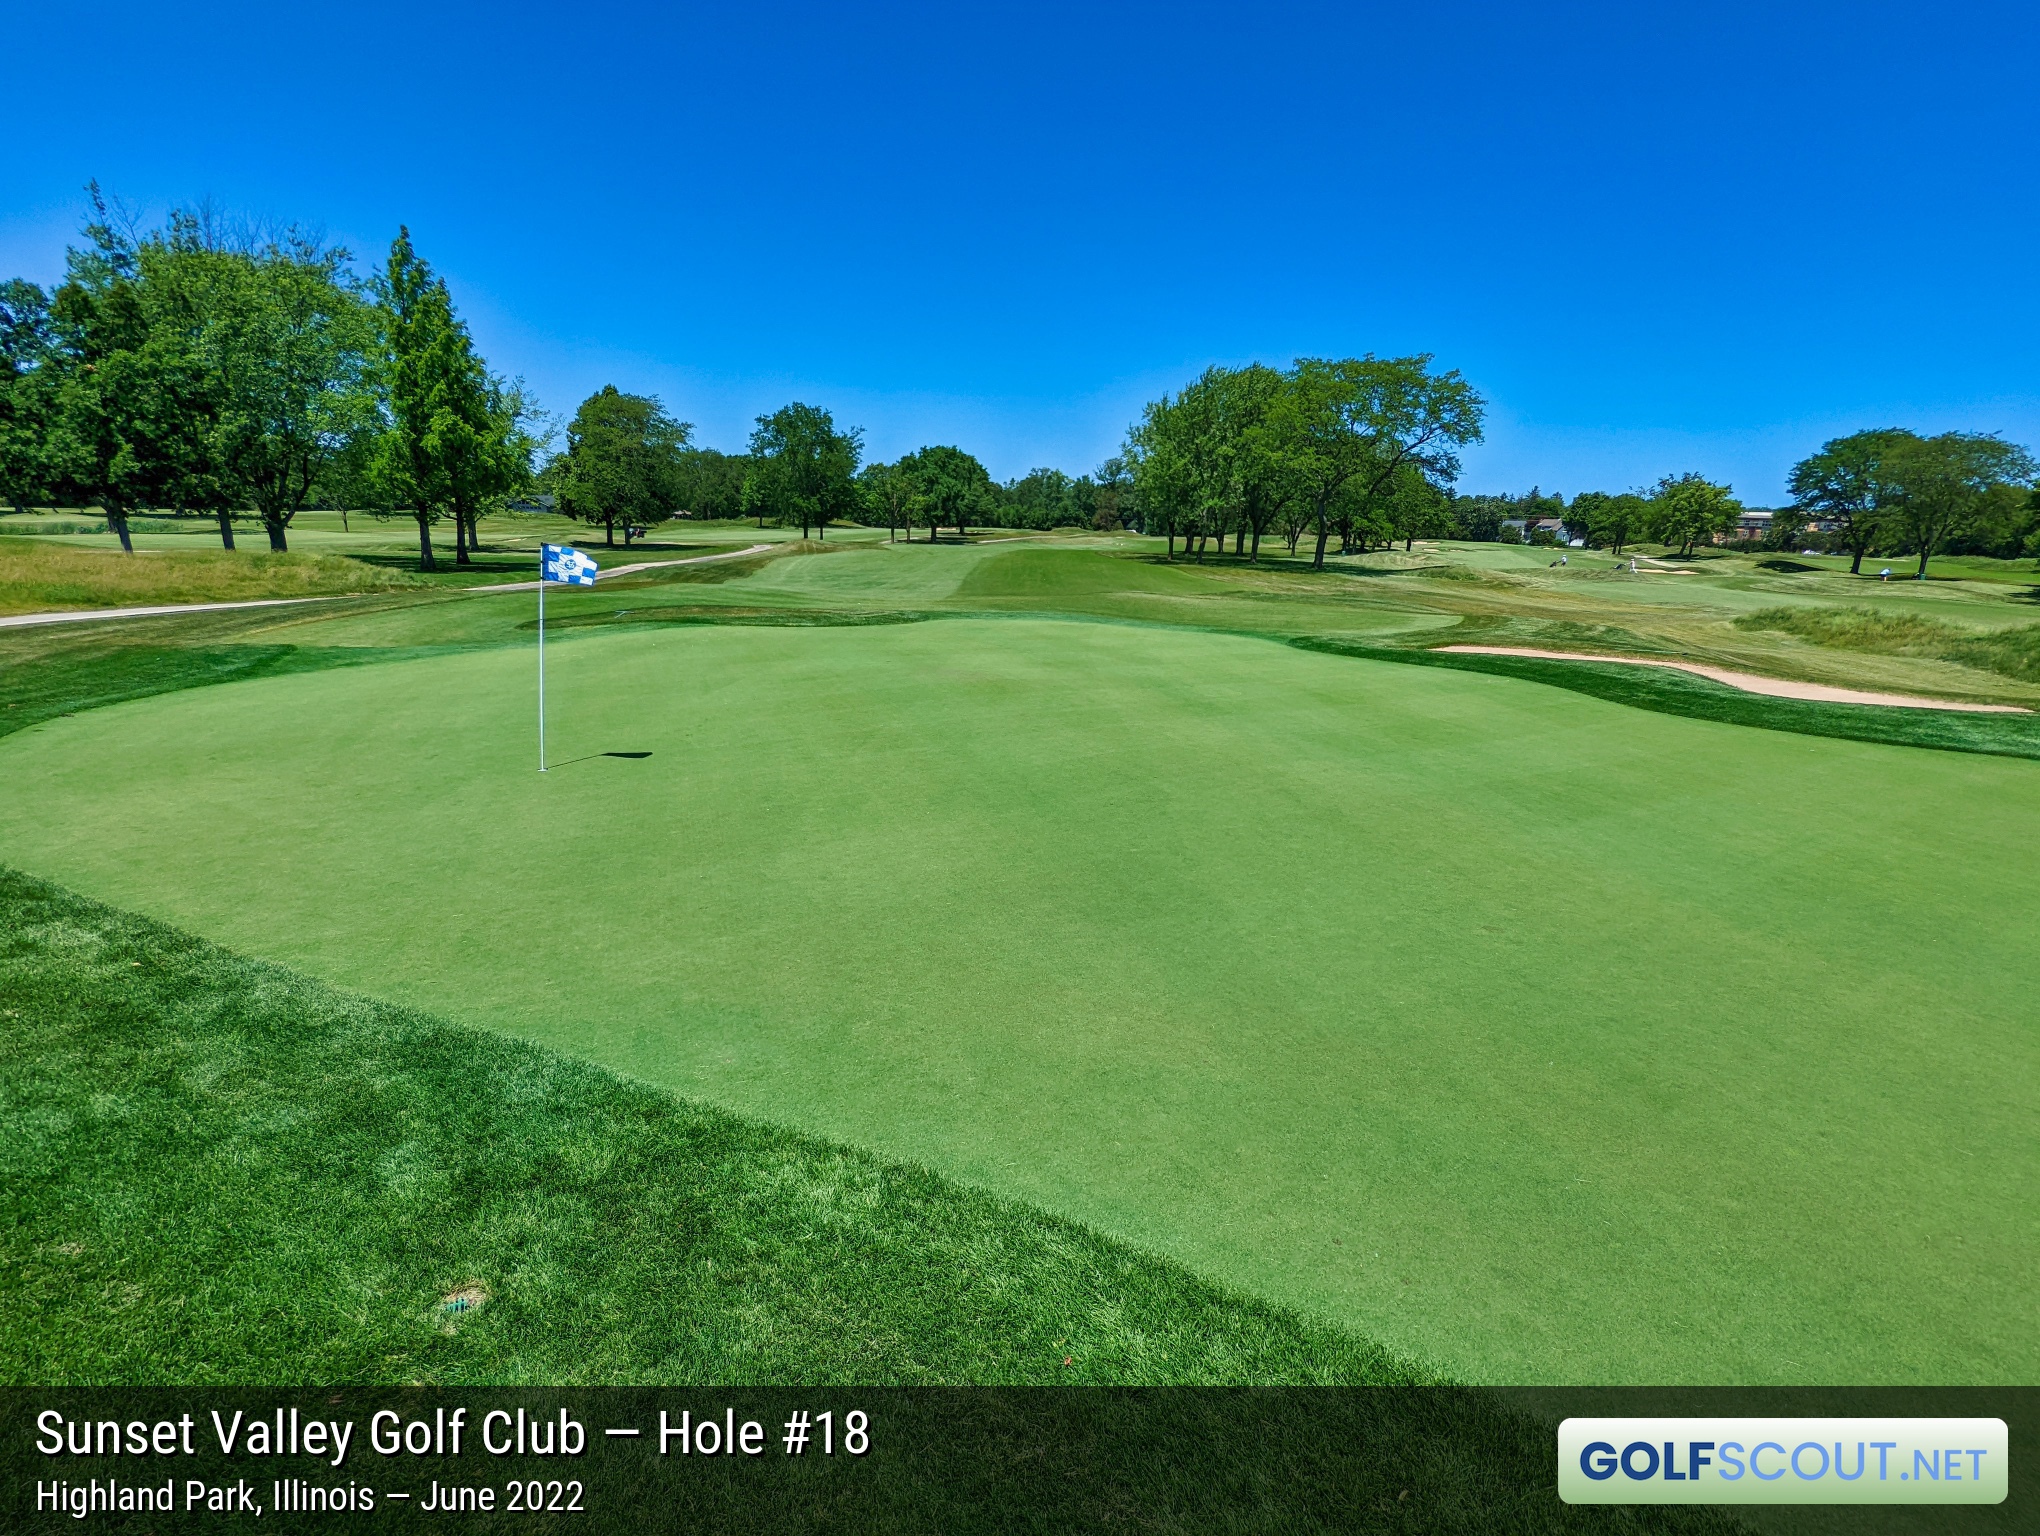 Photo of hole #18 at Sunset Valley Golf Club in Highland Park, Illinois. 